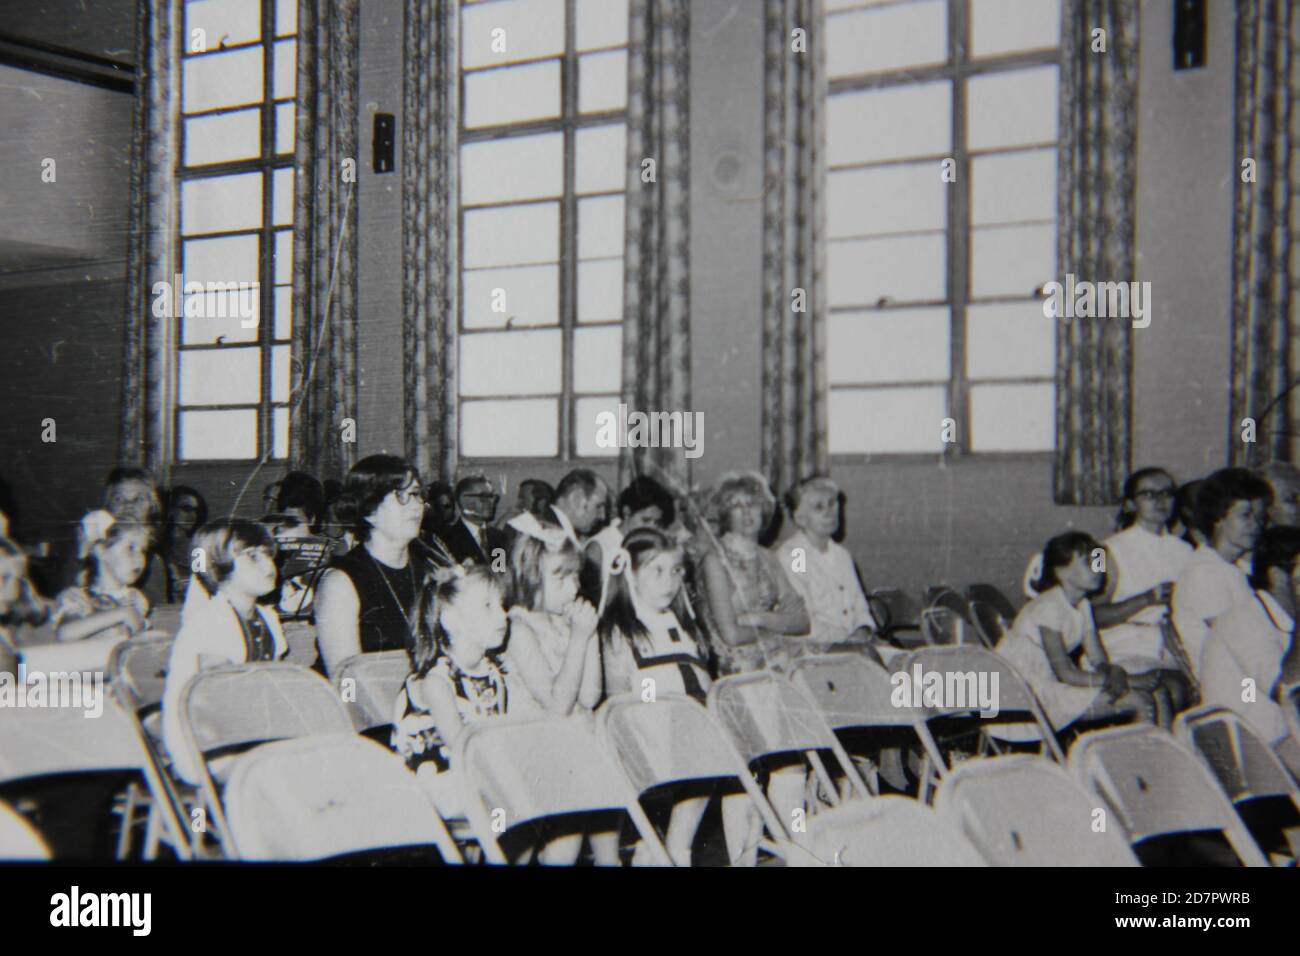 Fine 1970s vintage black and white photography of an audience listening and watching quietly while sitting in an auditorium. Stock Photo